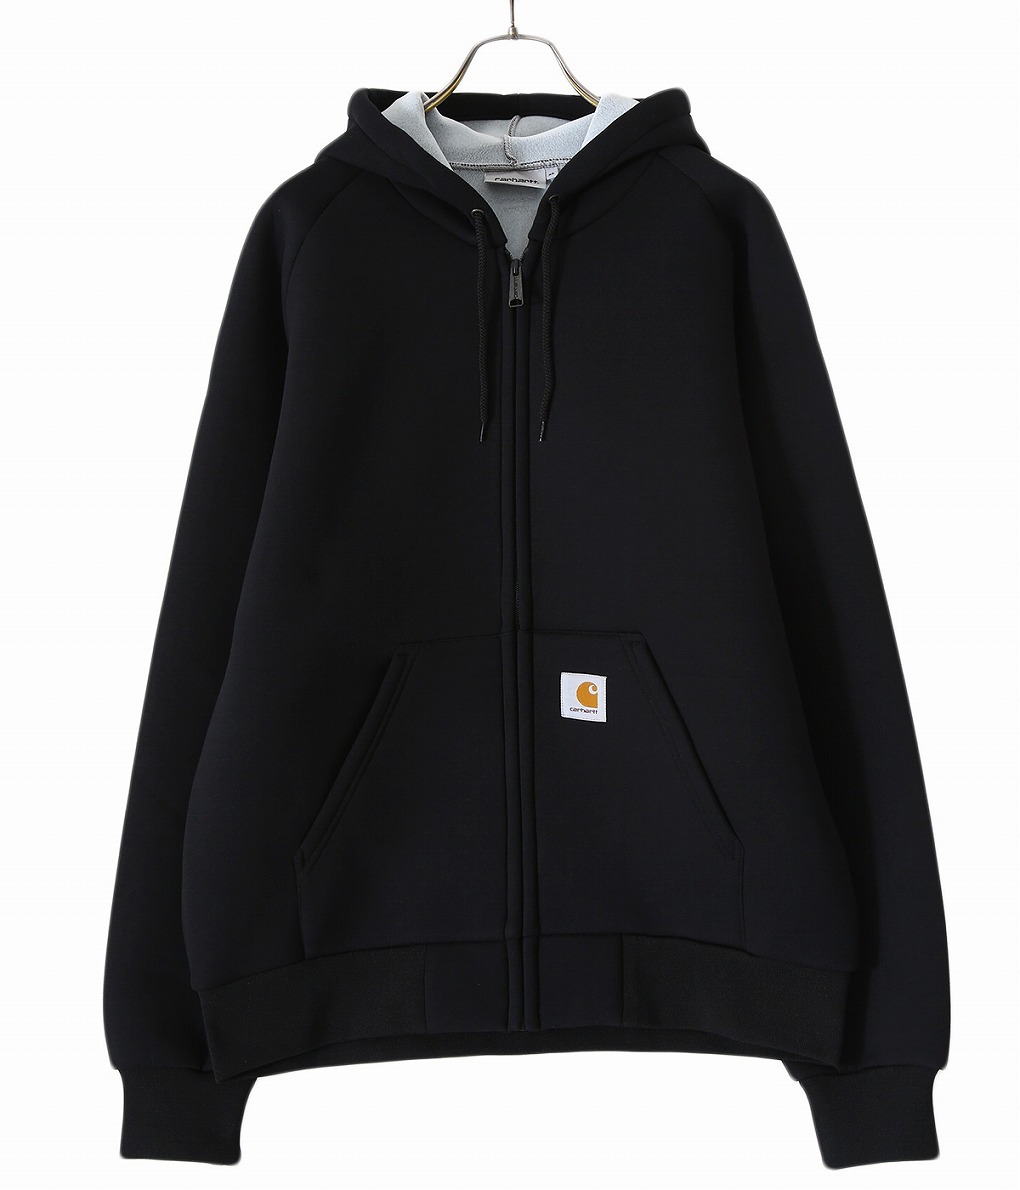 Carhartt WIP カーハート ワークインプログレス ： CAR-LUX HOODED JACKET 全2色 ： I018044  :I018044:ARKnets 通販 